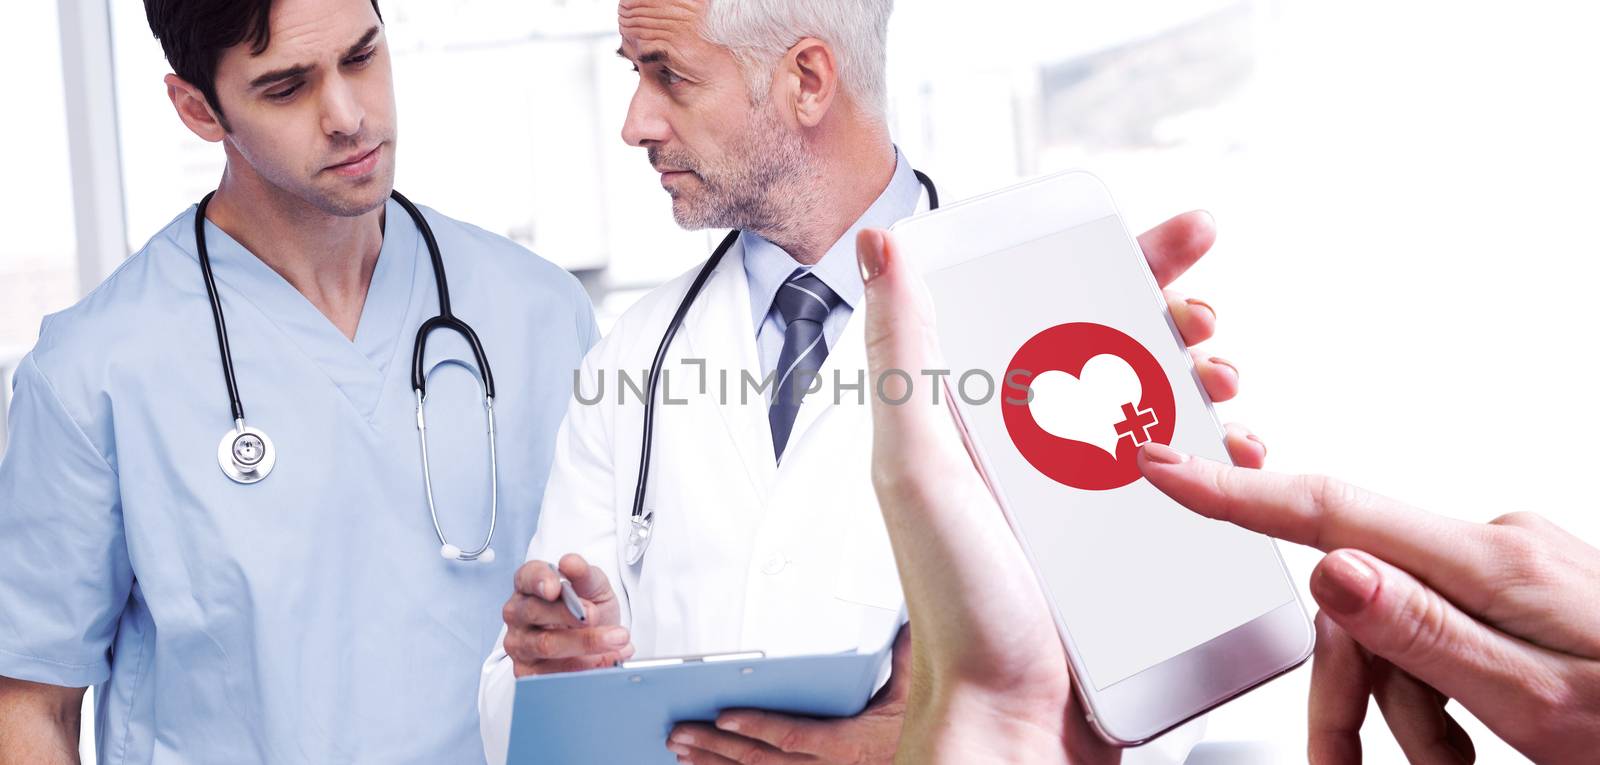 Hand holding smartphone against doctors talking about a file